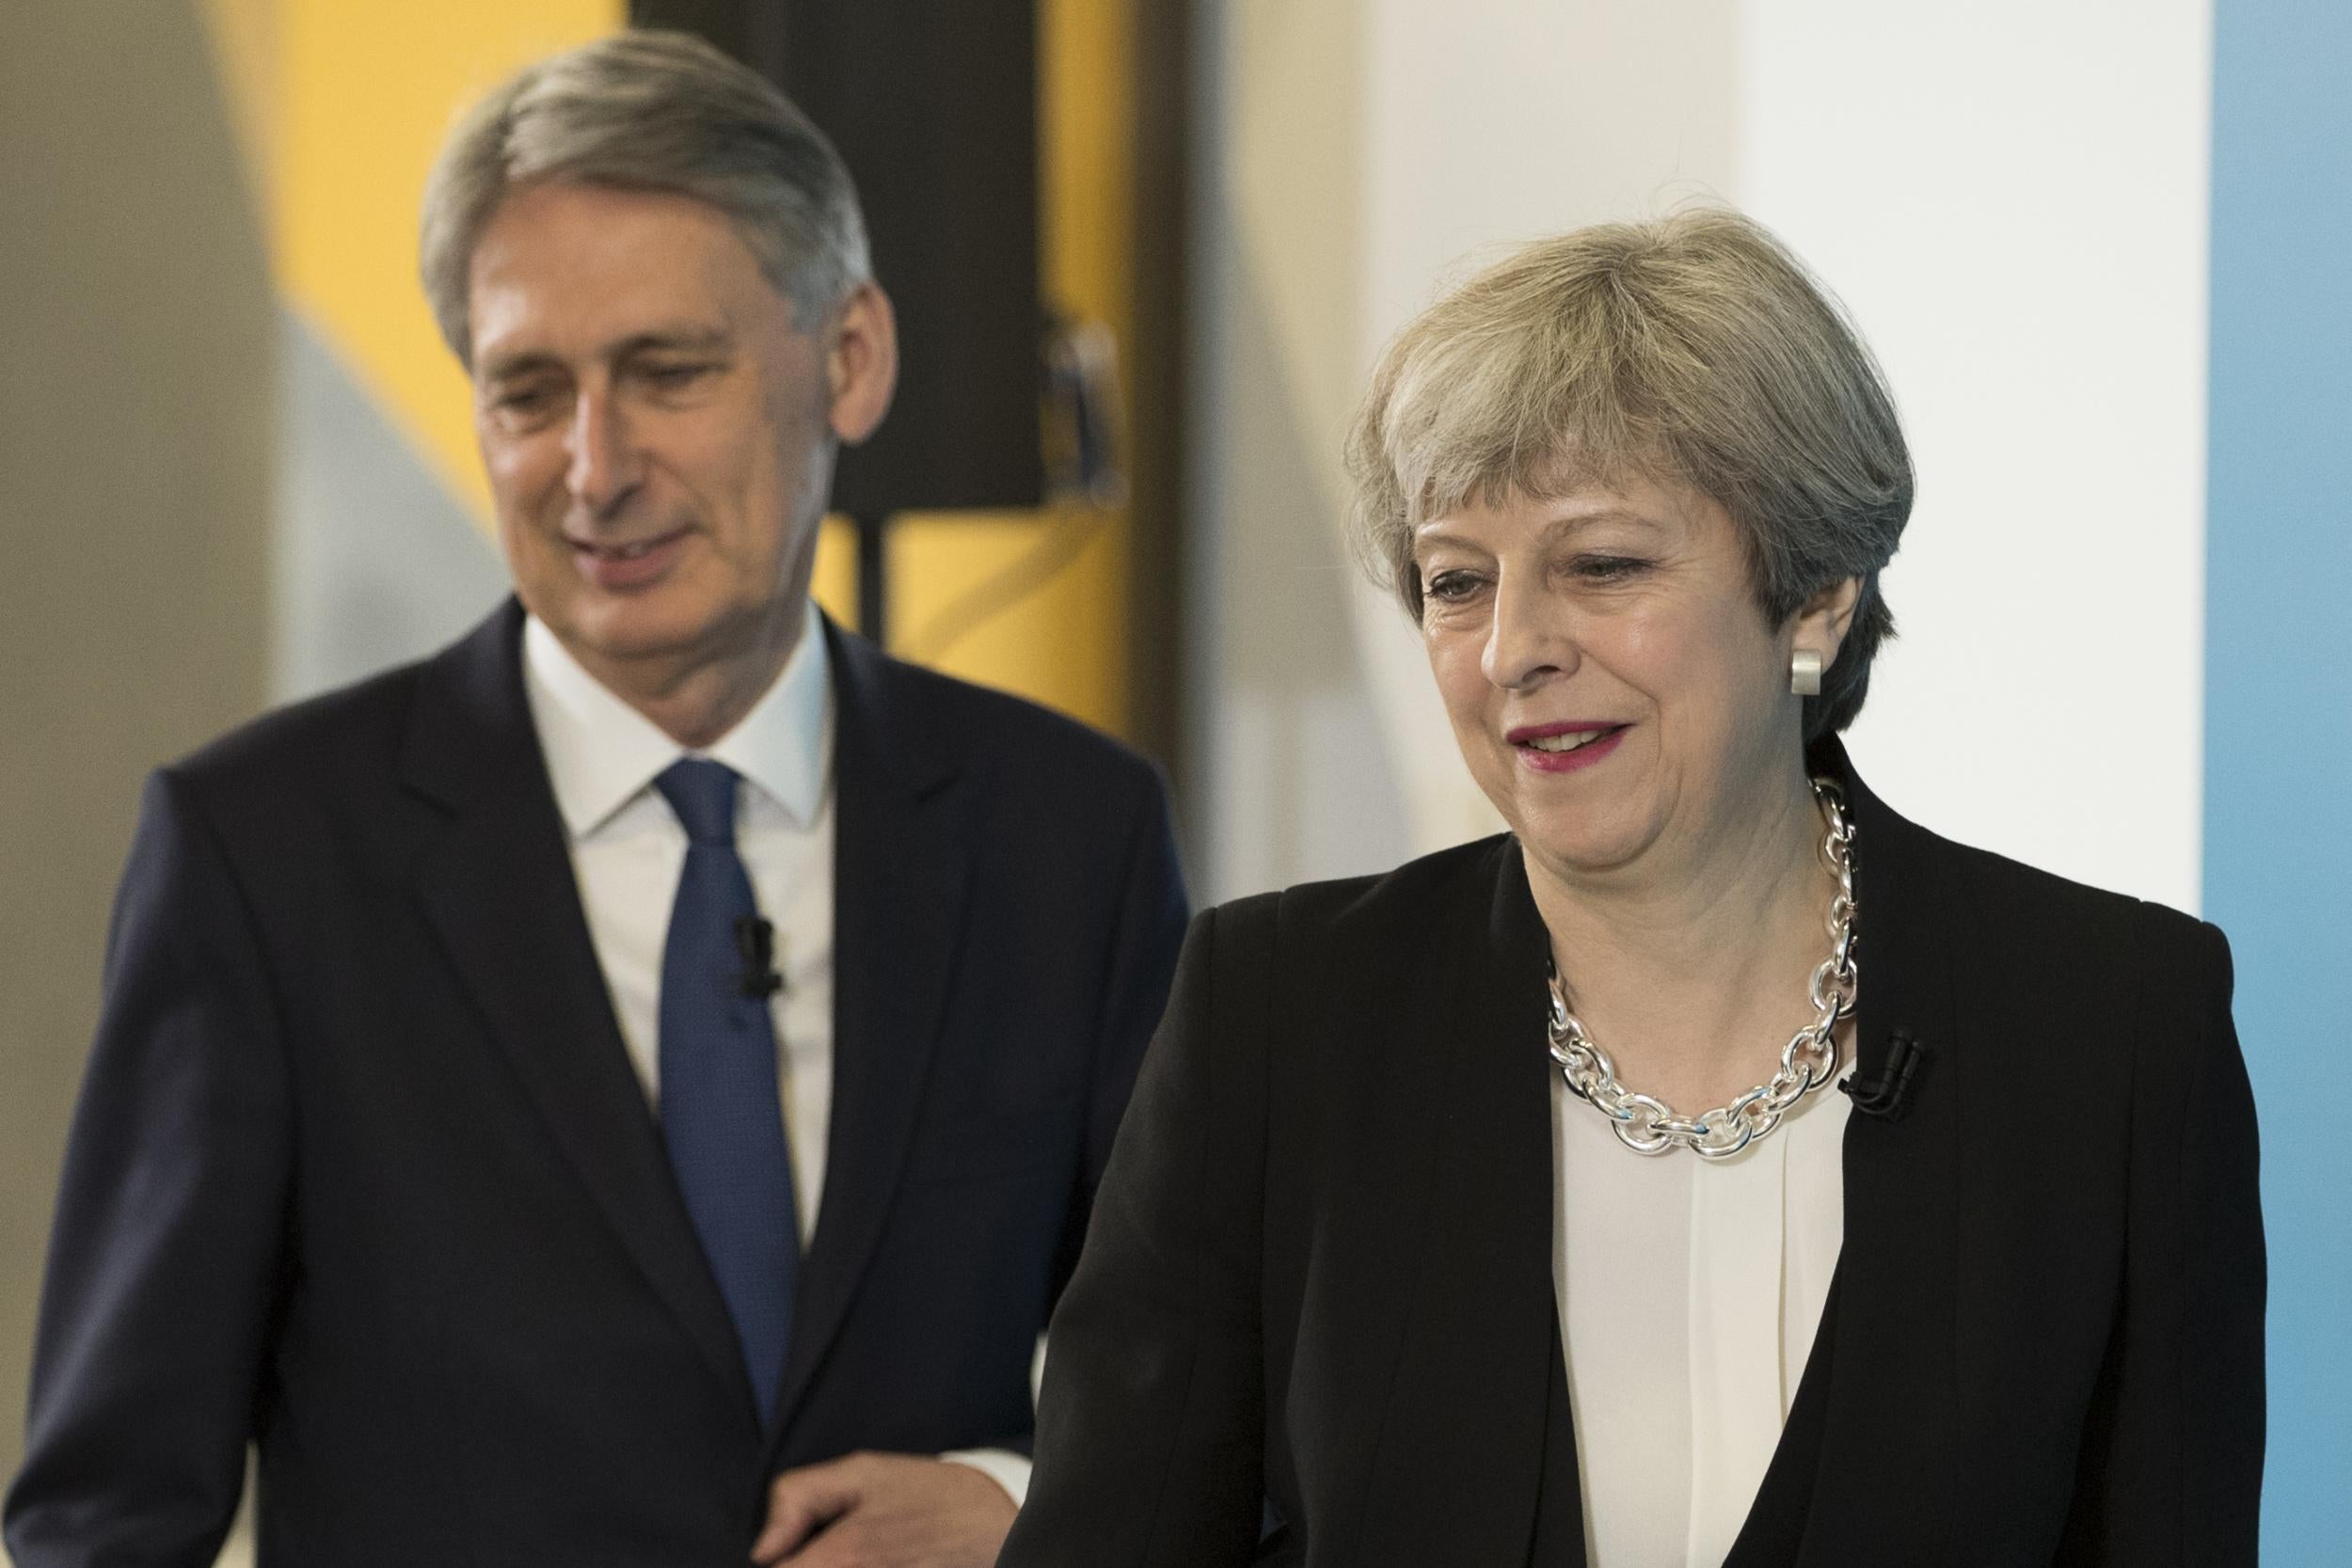 Earlier this week, Philip Hammond announced a £400m boost for transport links in the North. Today he is expected to expand on his plans at the Conservative Party Conference